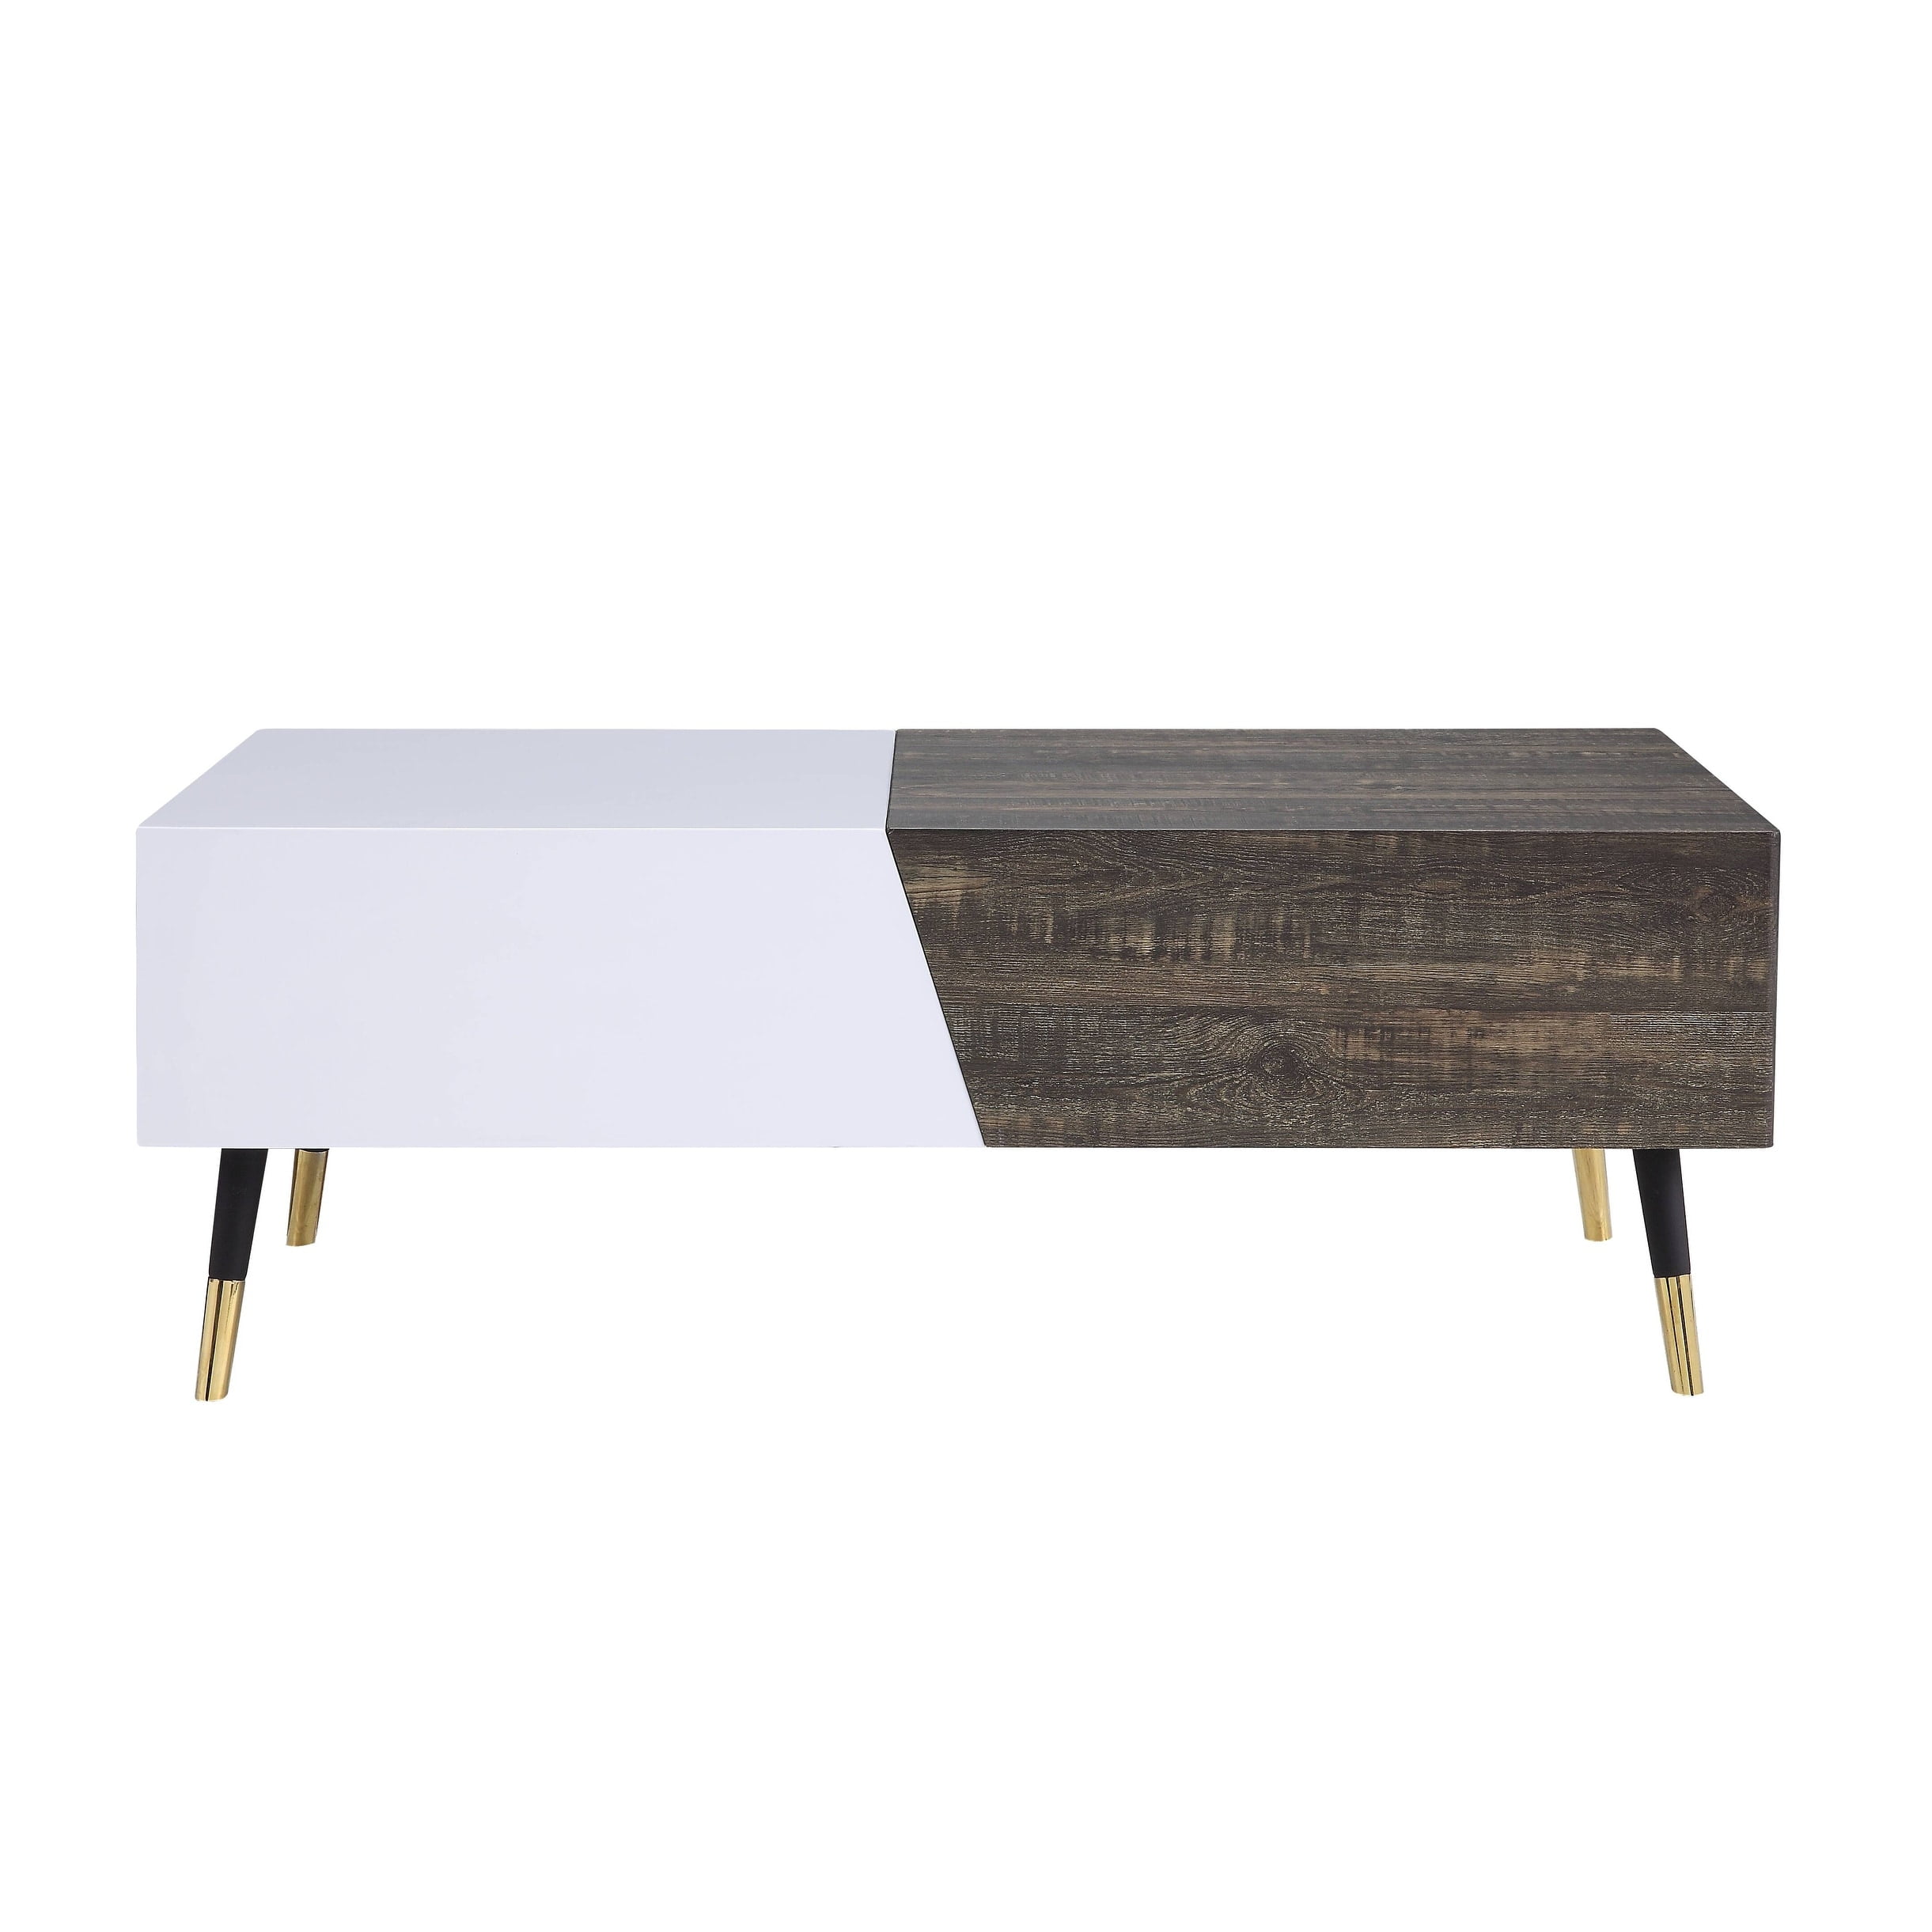 Picture of ACME Furniture 84680 Orion Coffee Table in High Gloss & Rustic Oak - 18 x 24 x 48 in.